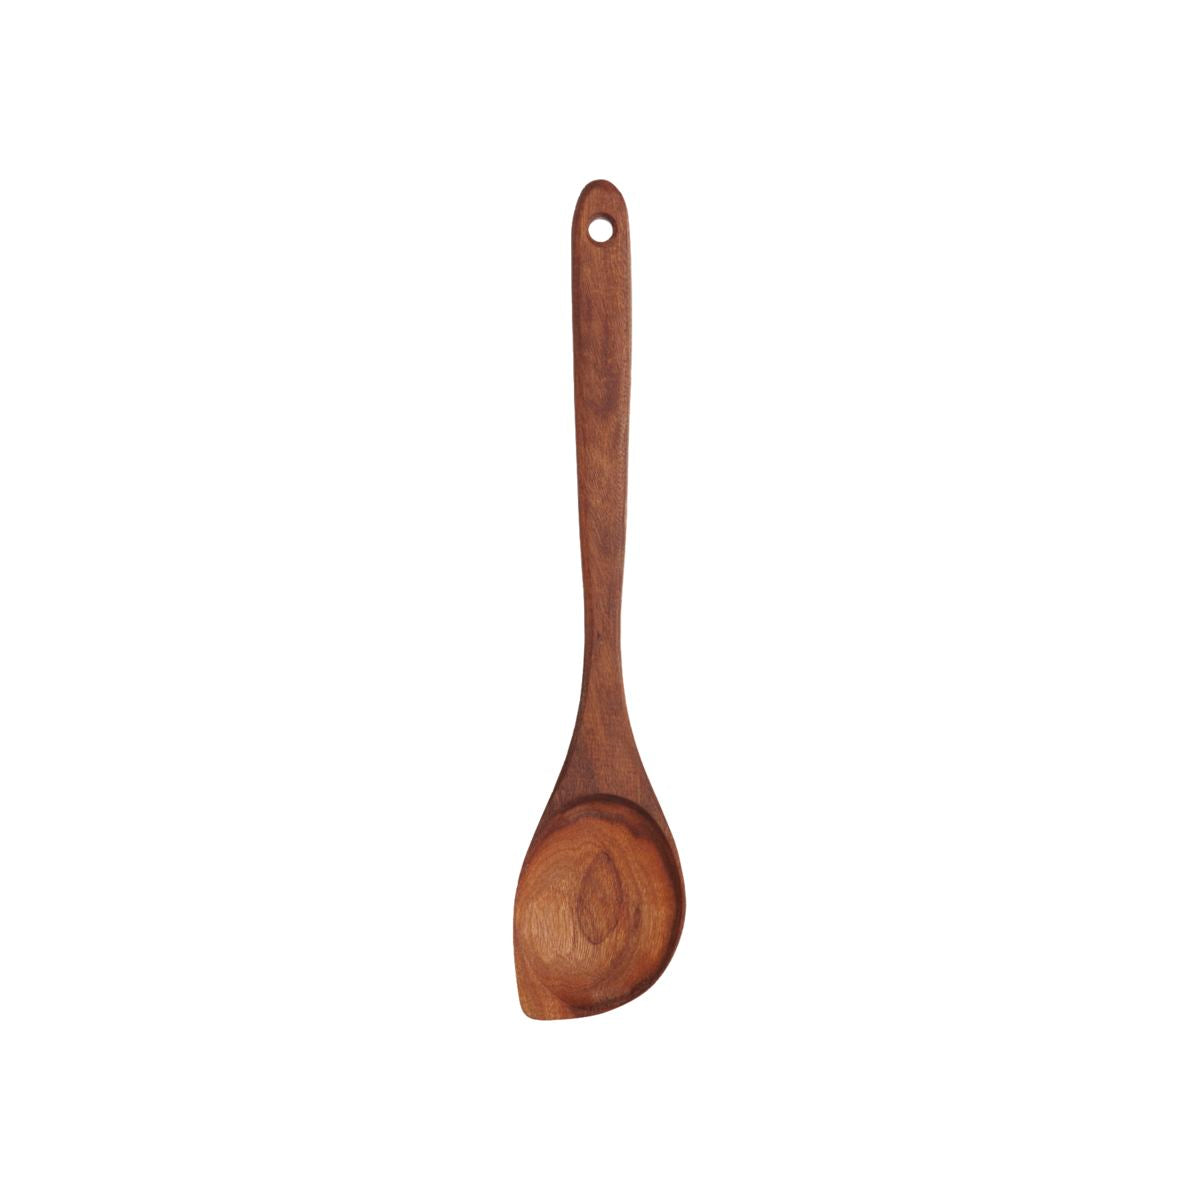 Cooking Spoon Made of Acacia Wood